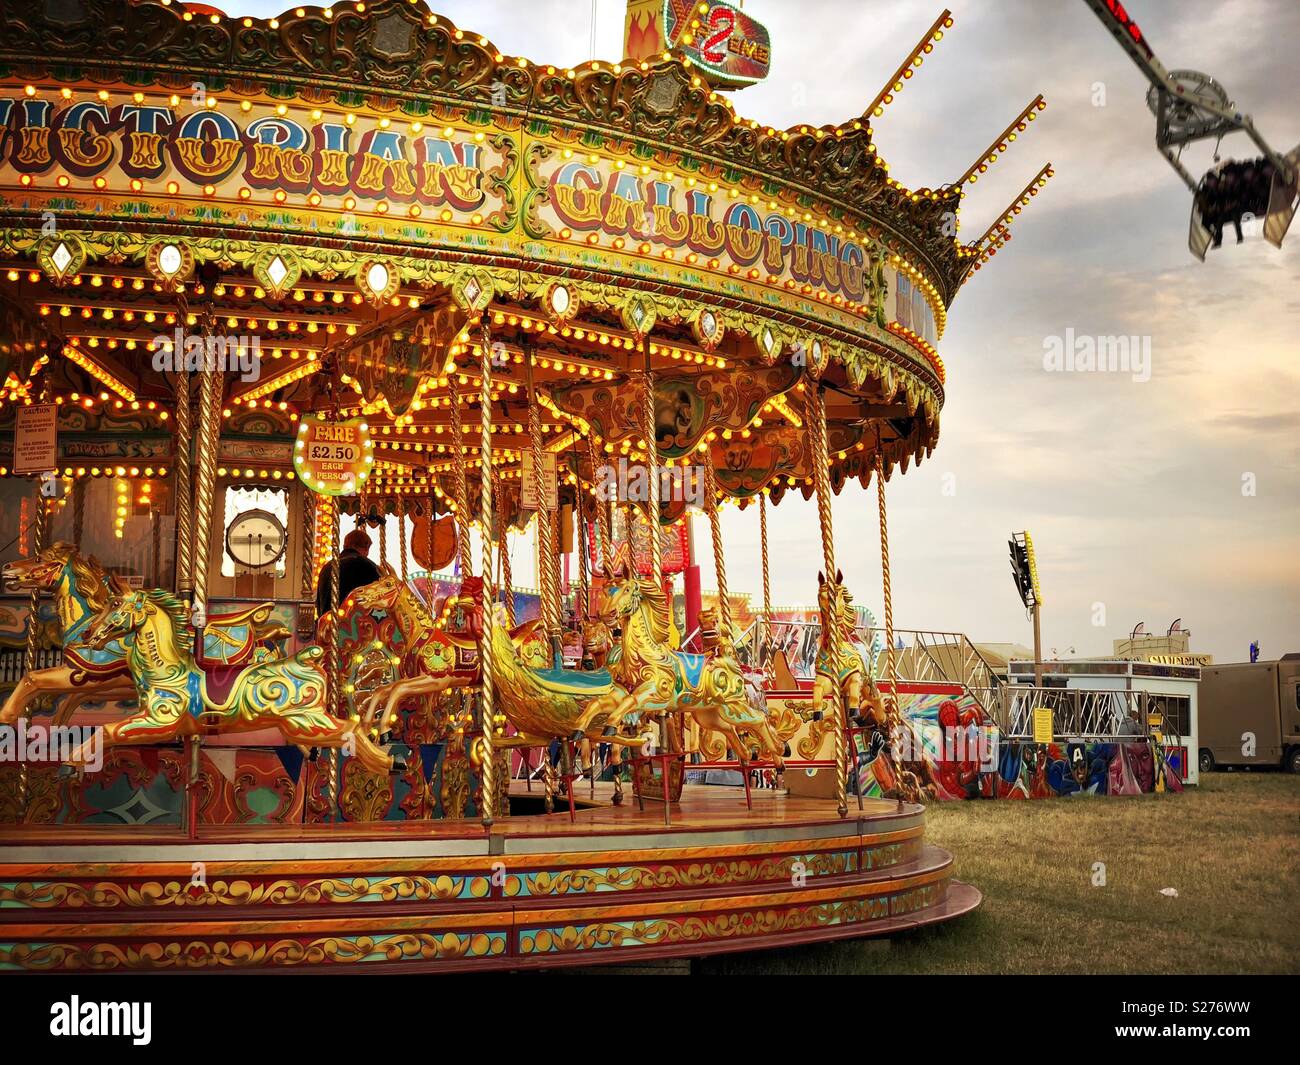 Carousel at the Newcastle Hoppings travelling fairground Stock Photo